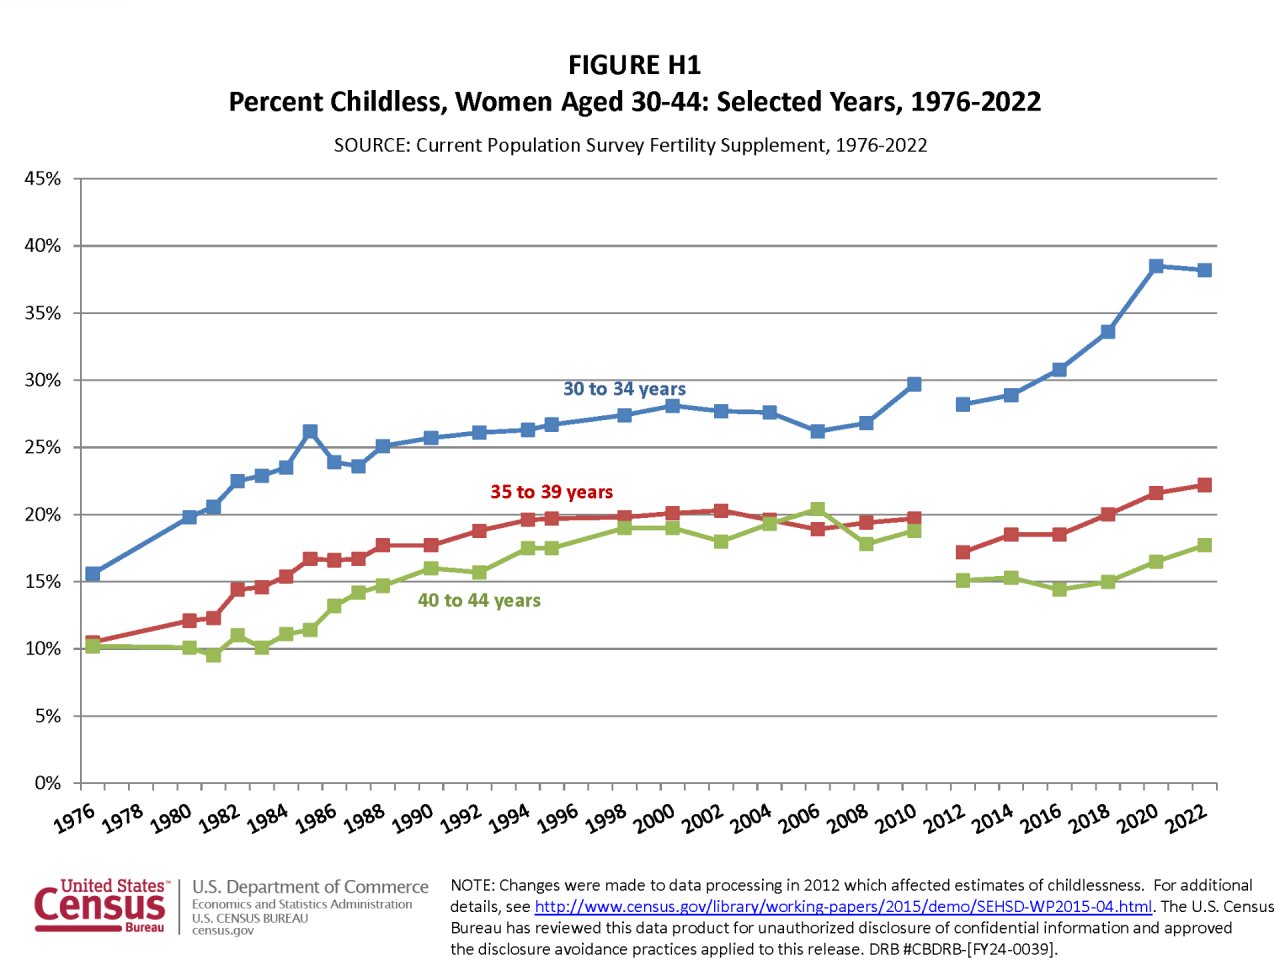 FIGURE H1. Percent Childless, Women Aged 30-44: Selected Years, 1976-2022